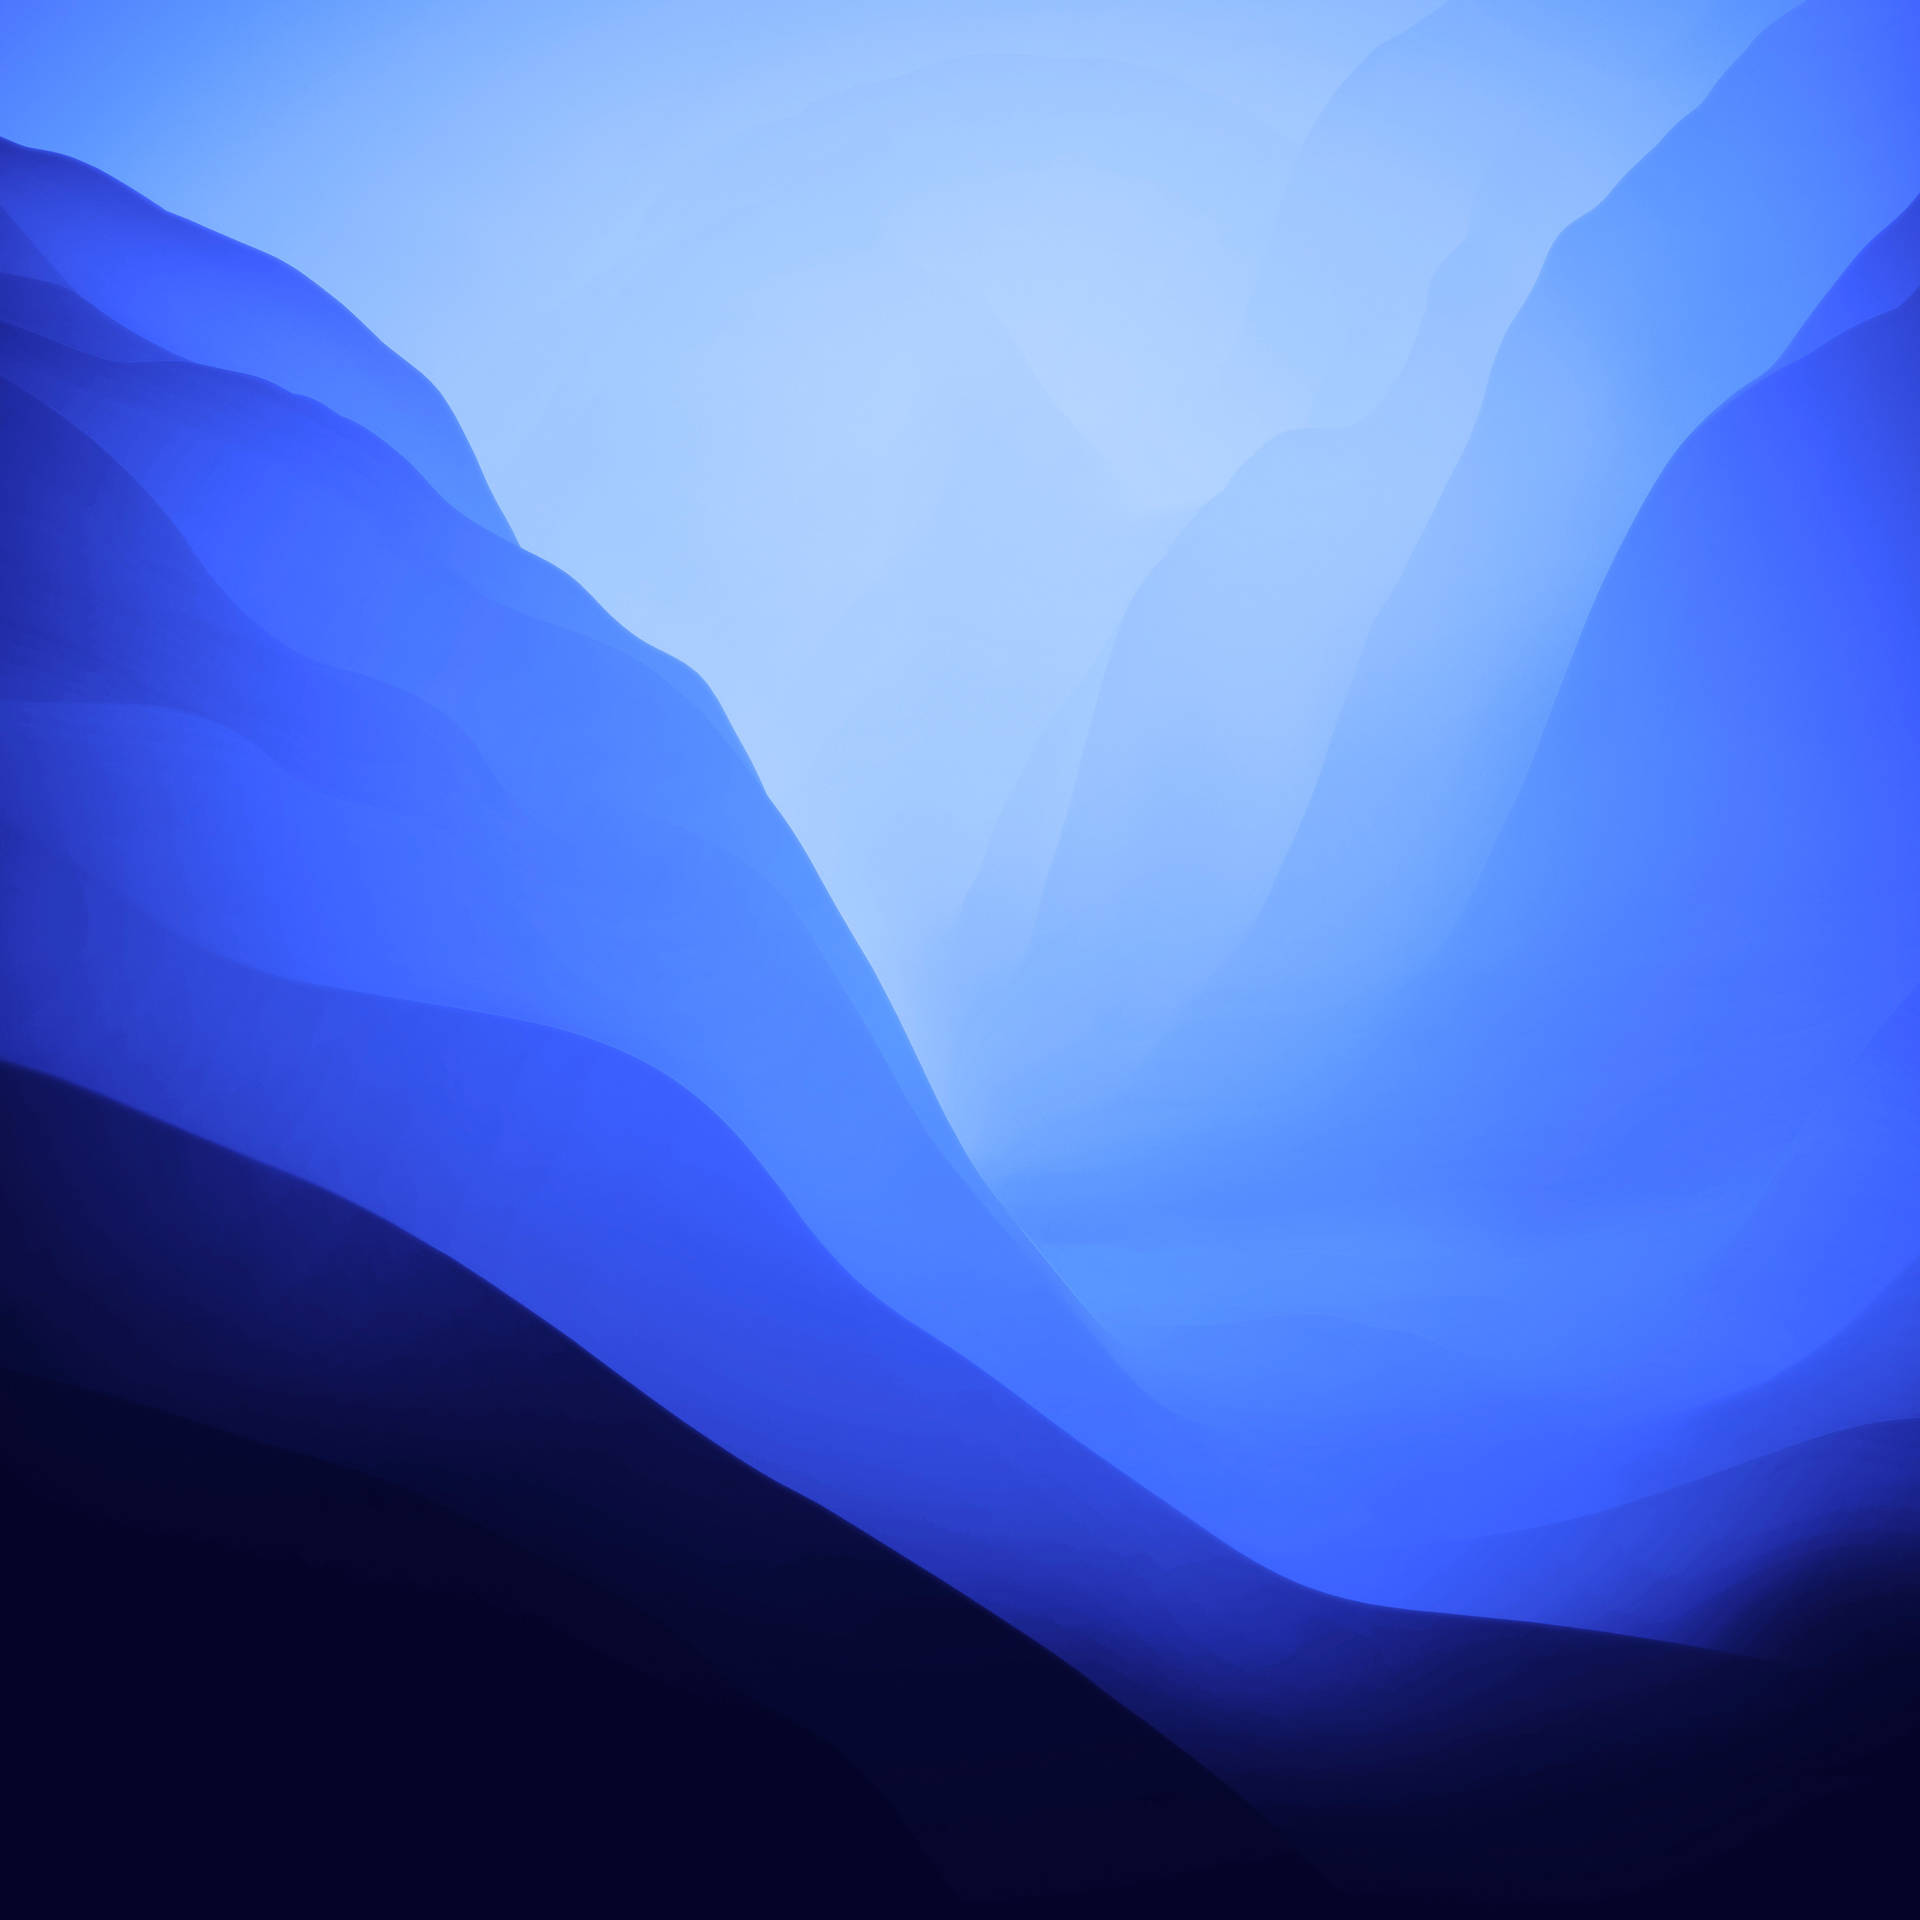 macOS Monterey official wallpapers